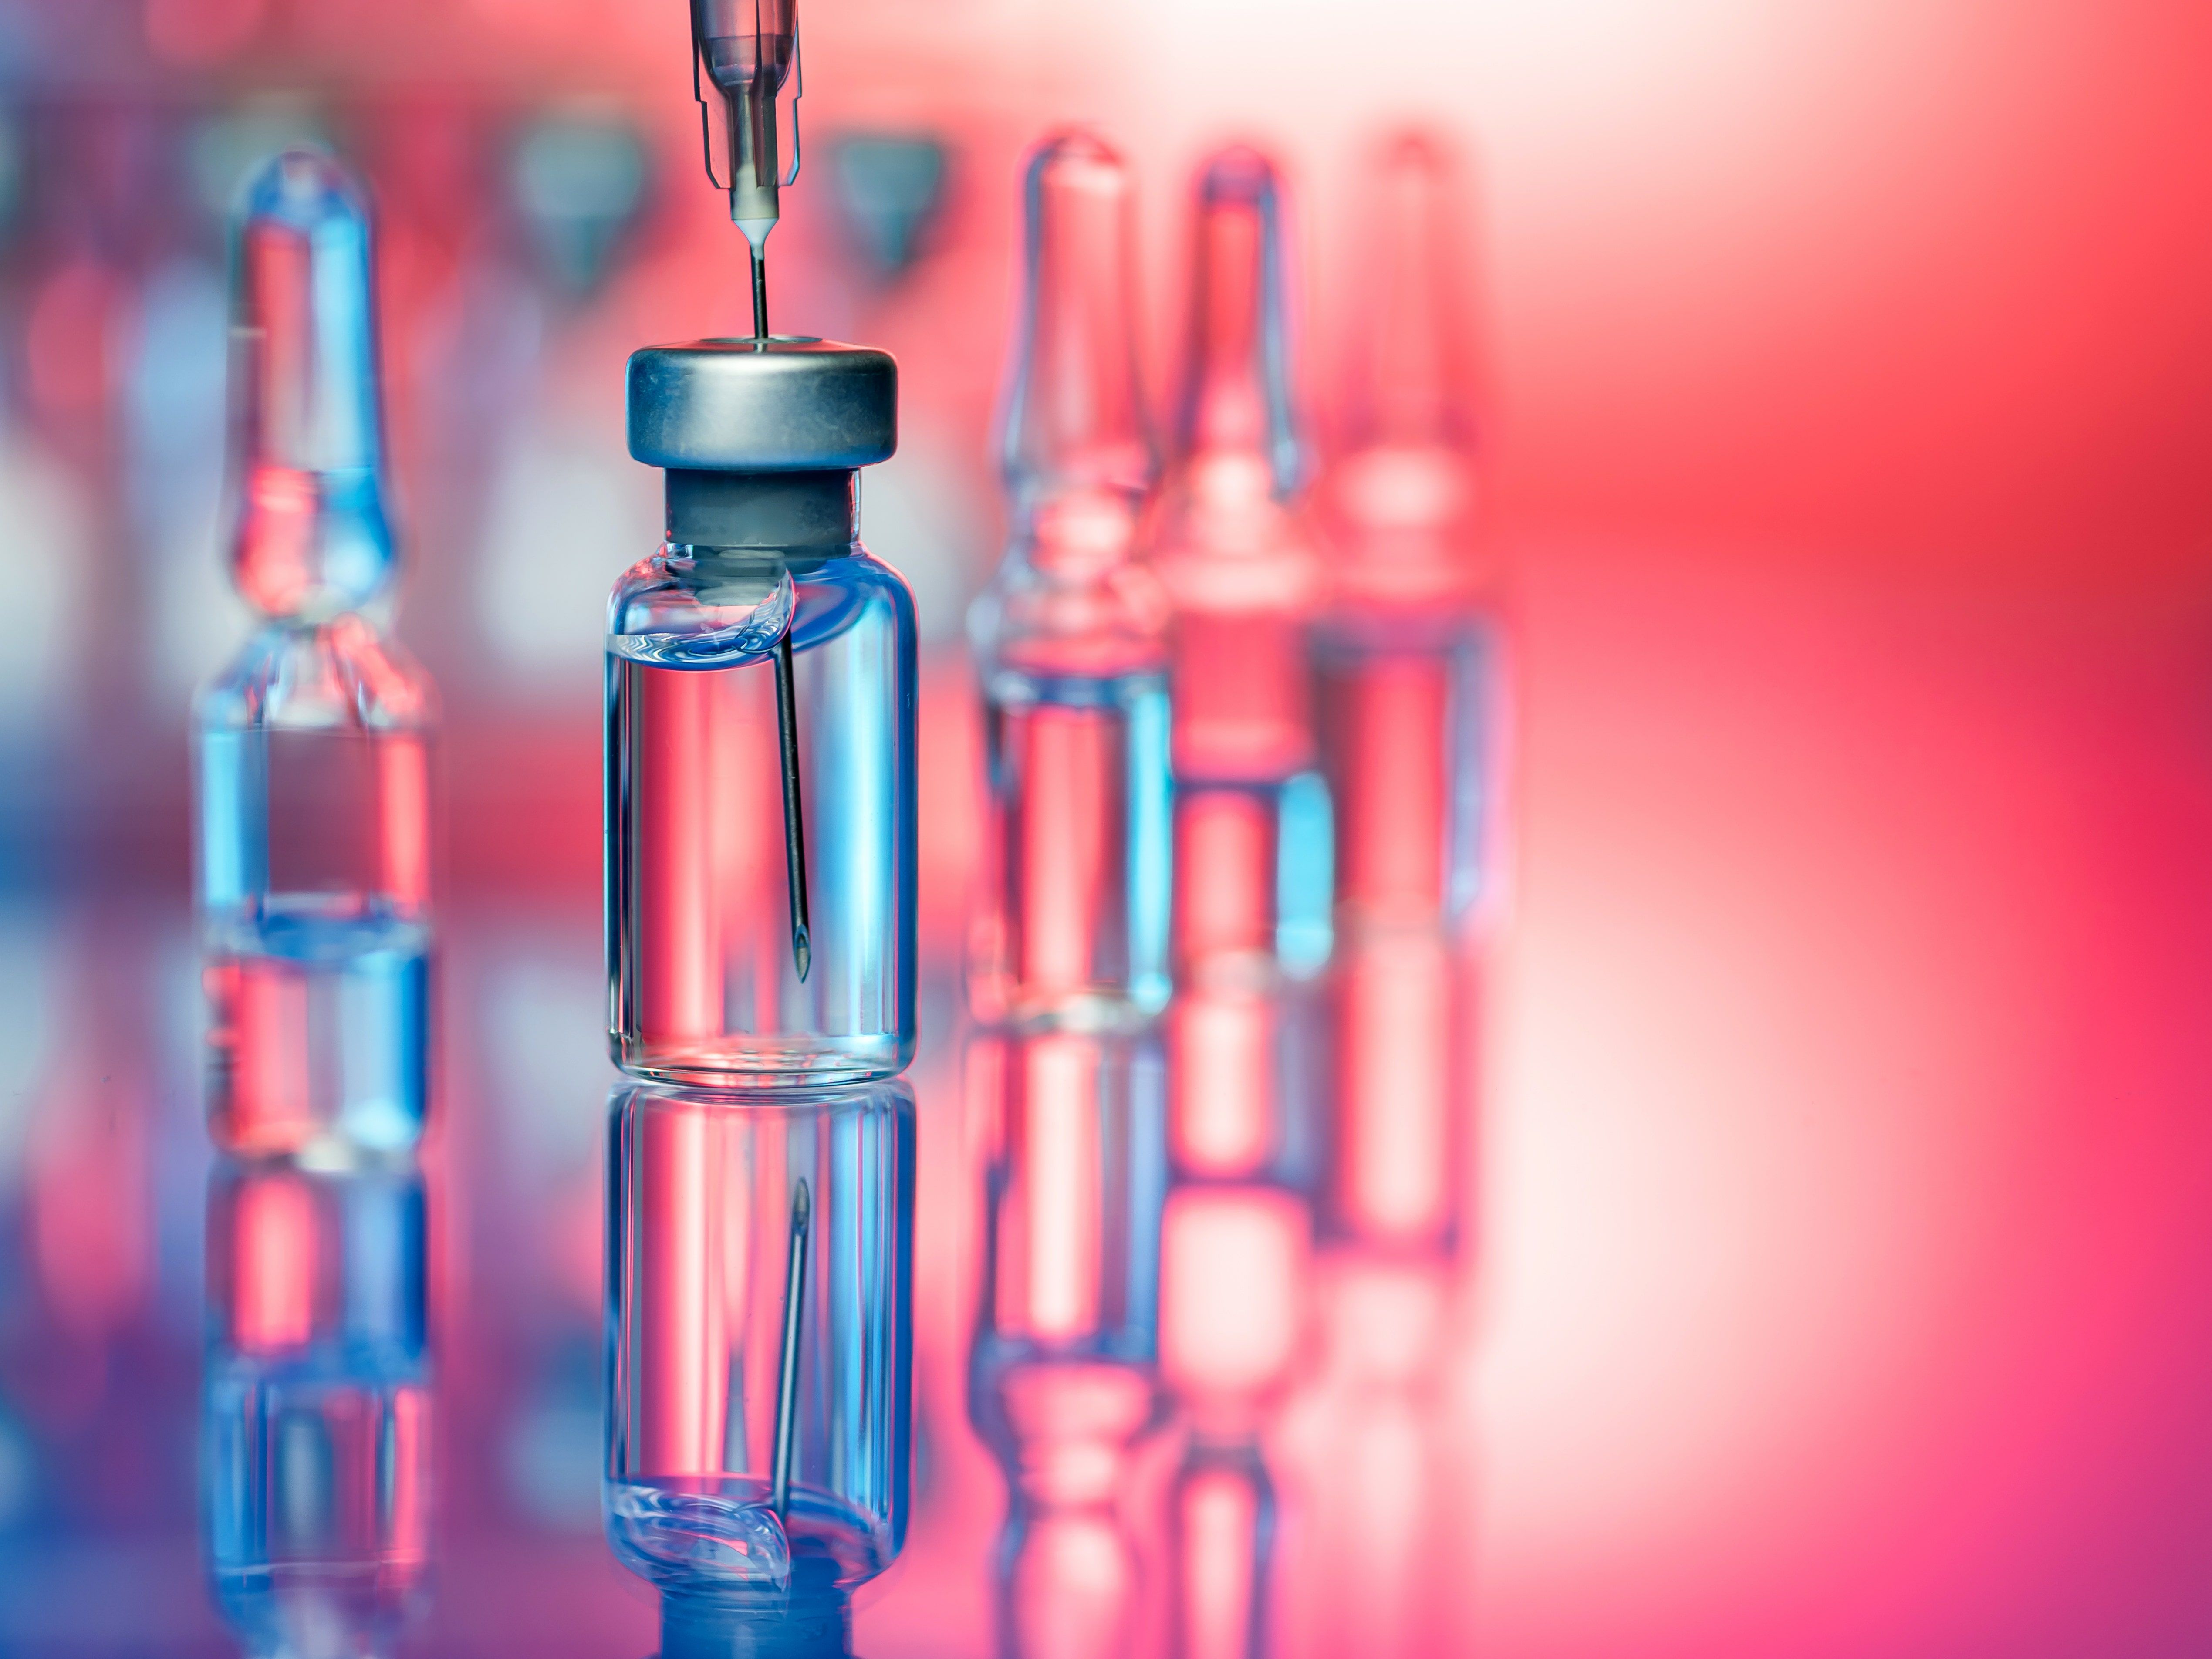 A row of vaccine bottles with one in the foreground being filled with a syringe - Chemistry